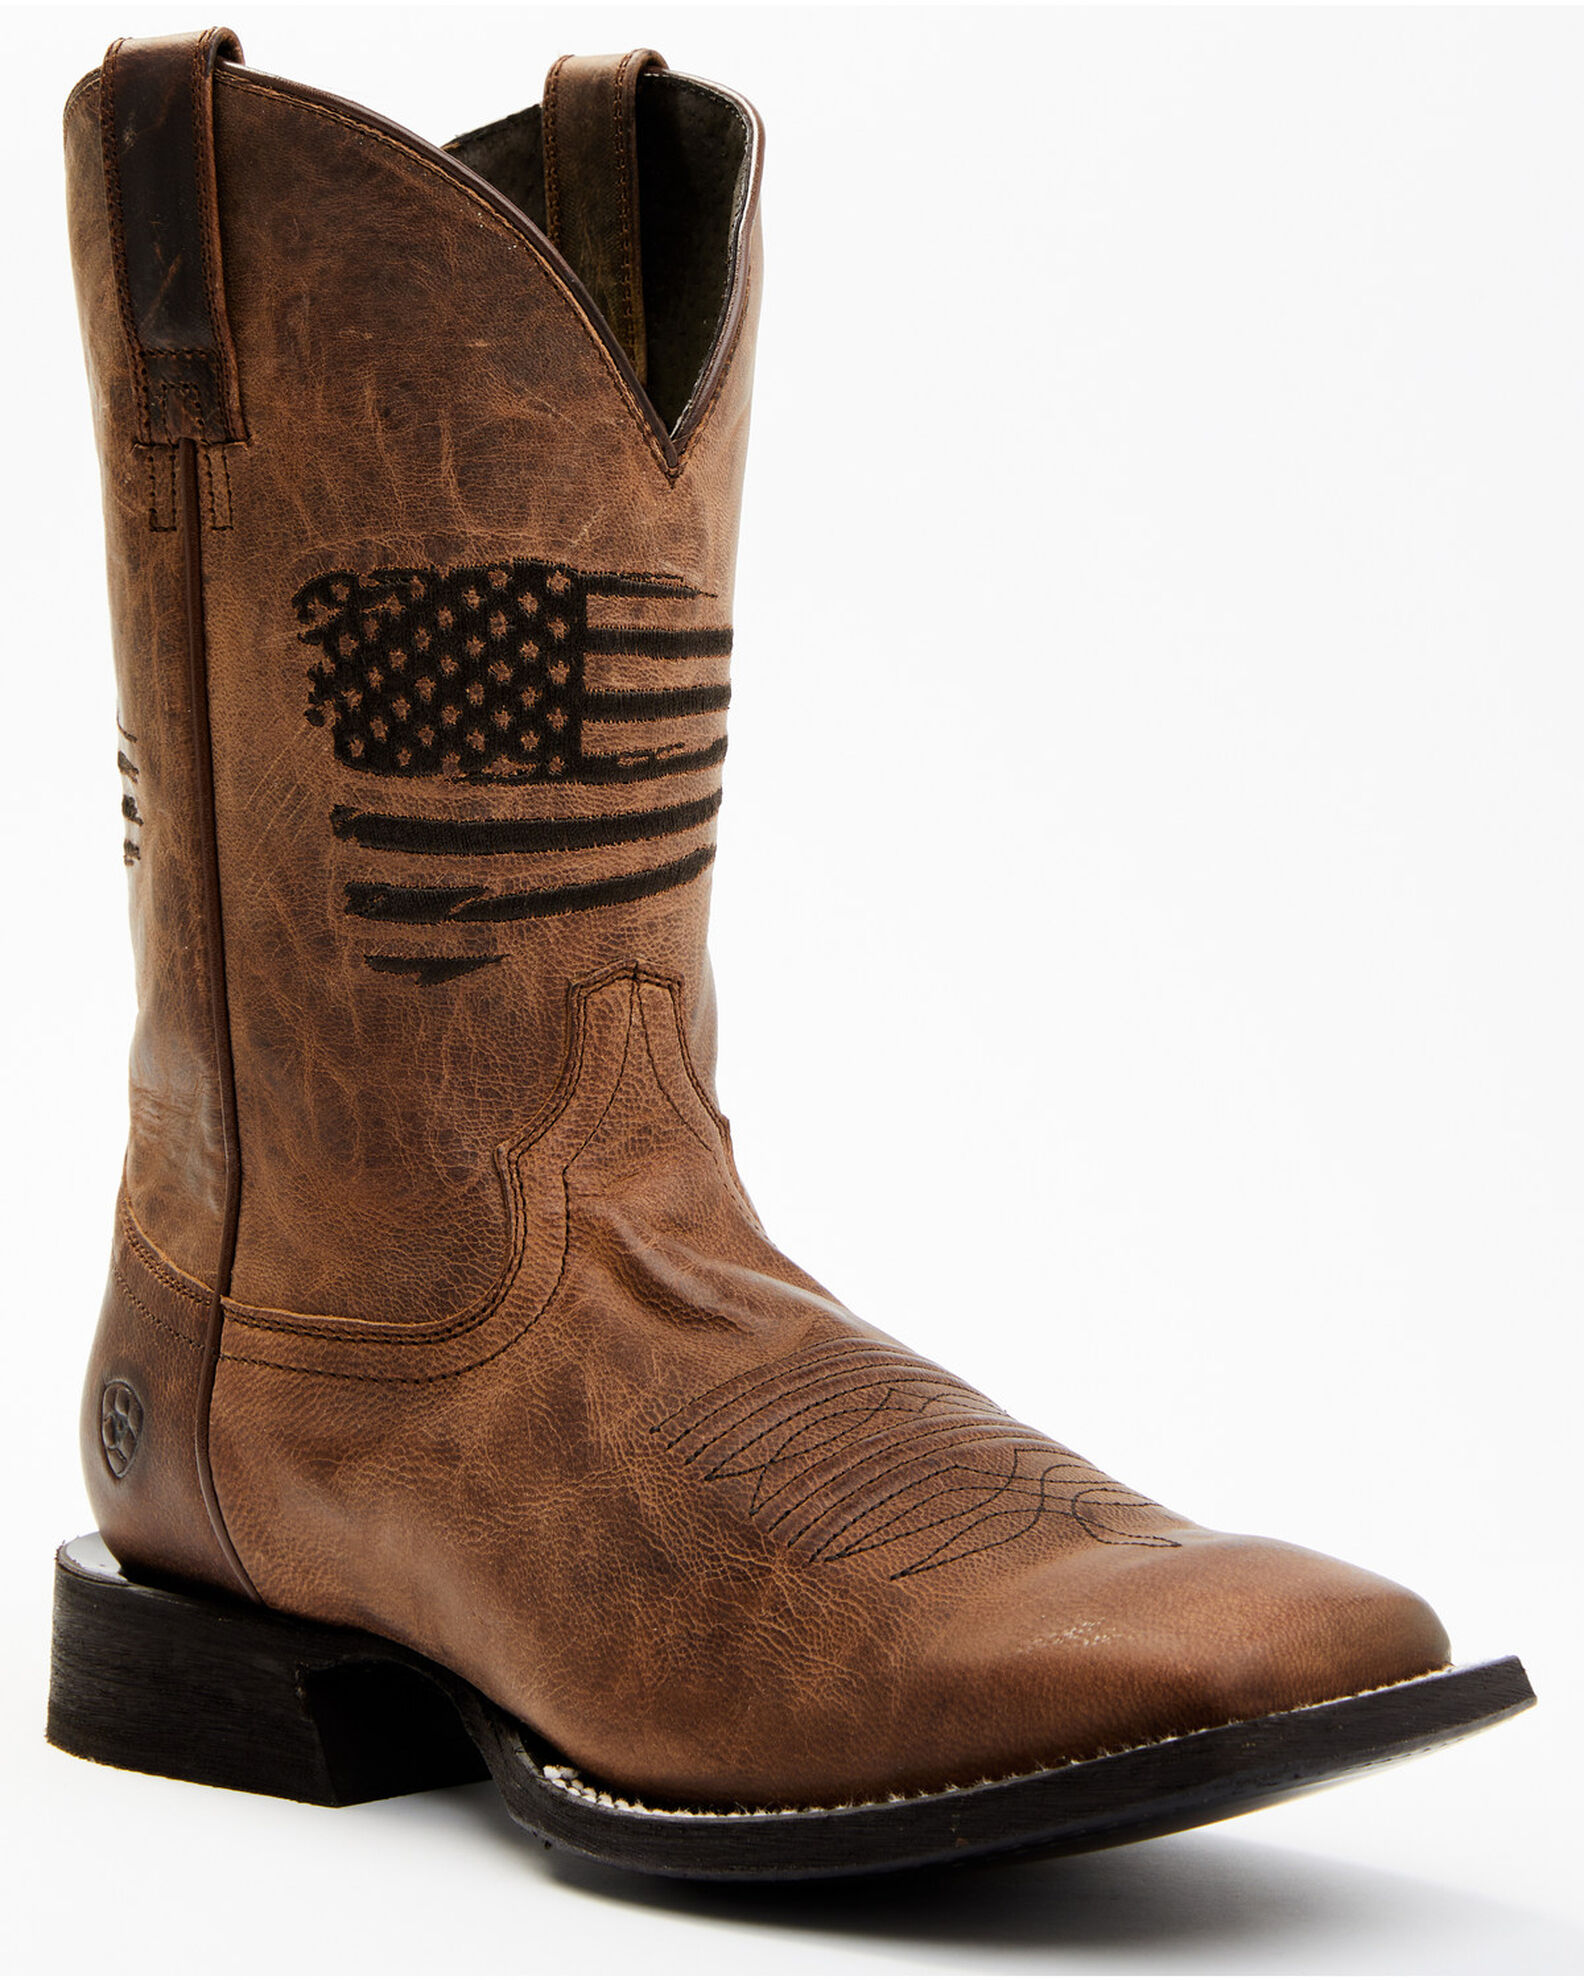 Product Name: Ariat Men's Circuit Patriot Western Boots - Broad Square Toe